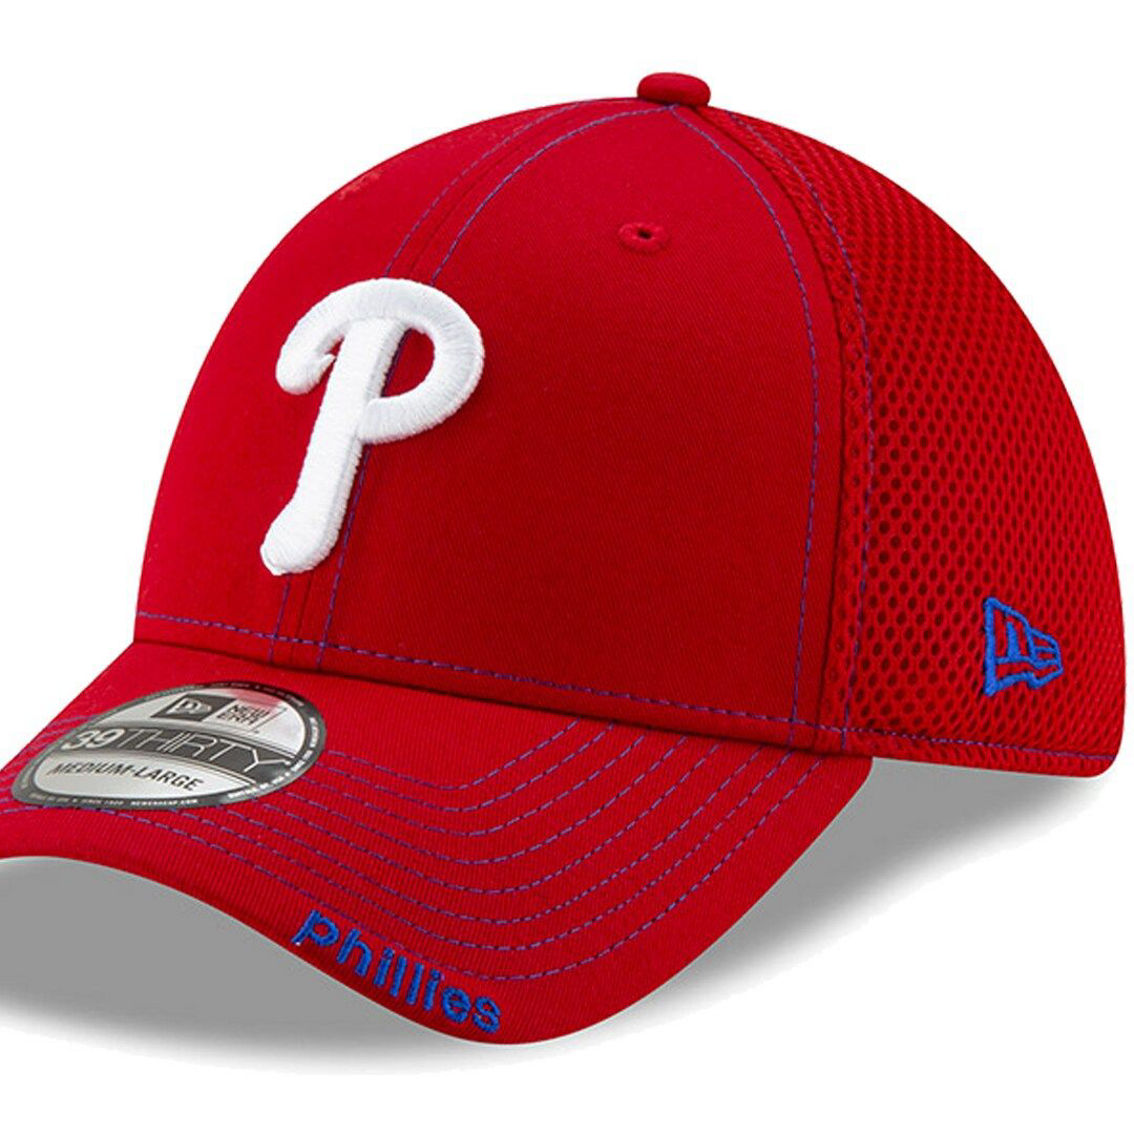 New Era Men's Red Philadelphia Phillies Neo 39THIRTY Fitted Hat - Image 2 of 4